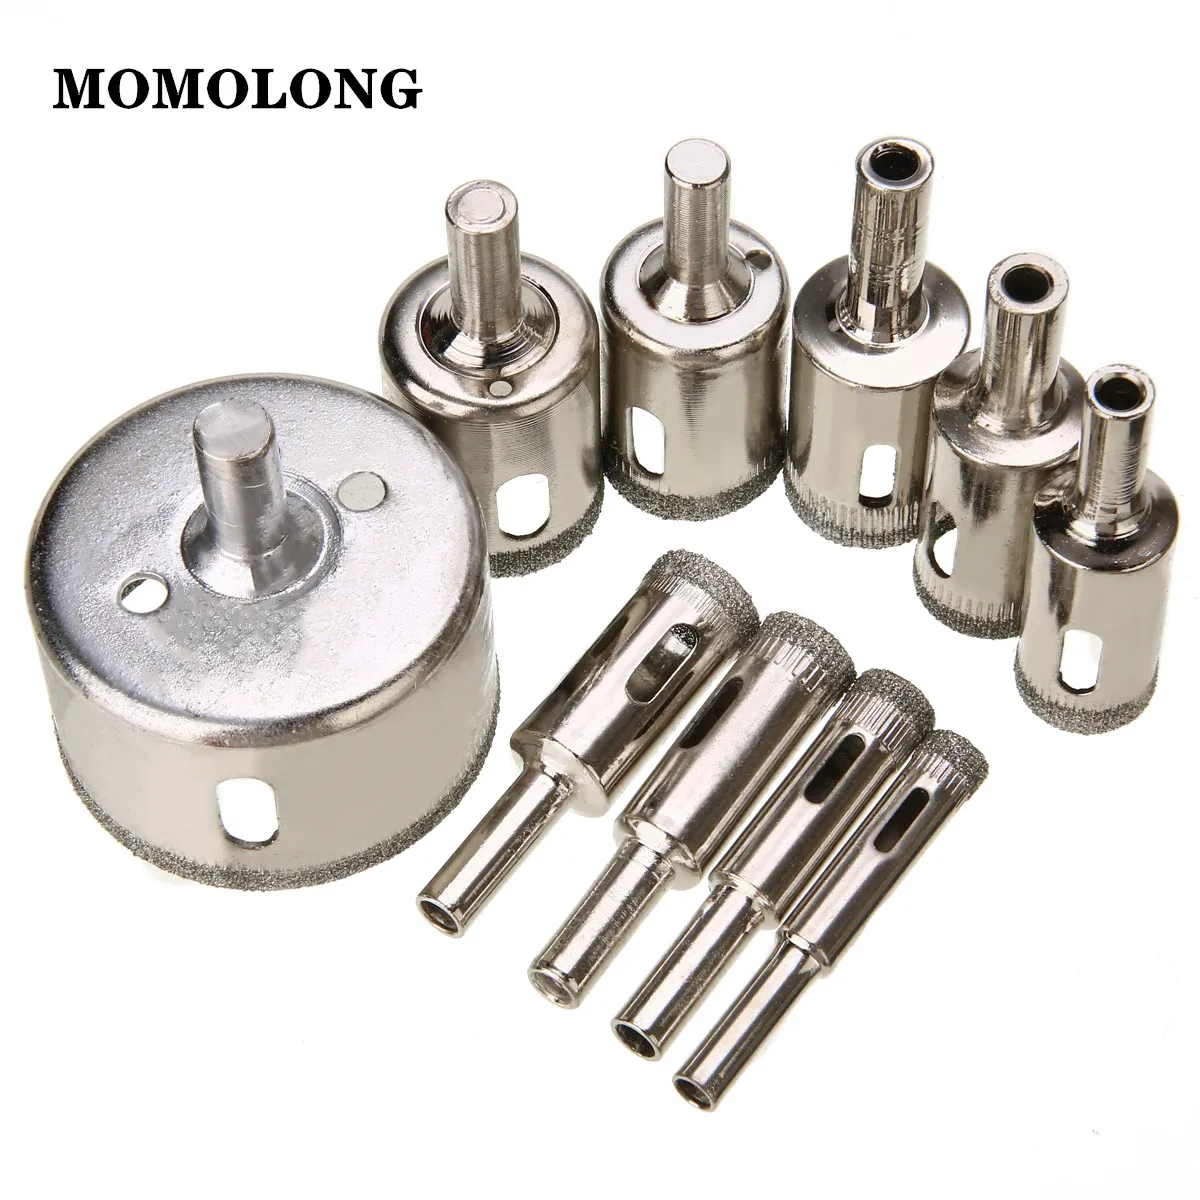 10/15/30Pcs Diamond Coated Drill Bit  Glass Ceramic Hole Saw  3-50mm Drilling Bits For Tile Marble Glass Ceramic For Power Tools diamond coated drill bit set tile marble glass ceramic hole saw drilling bits for power tools 6mm 50mm 15pcs